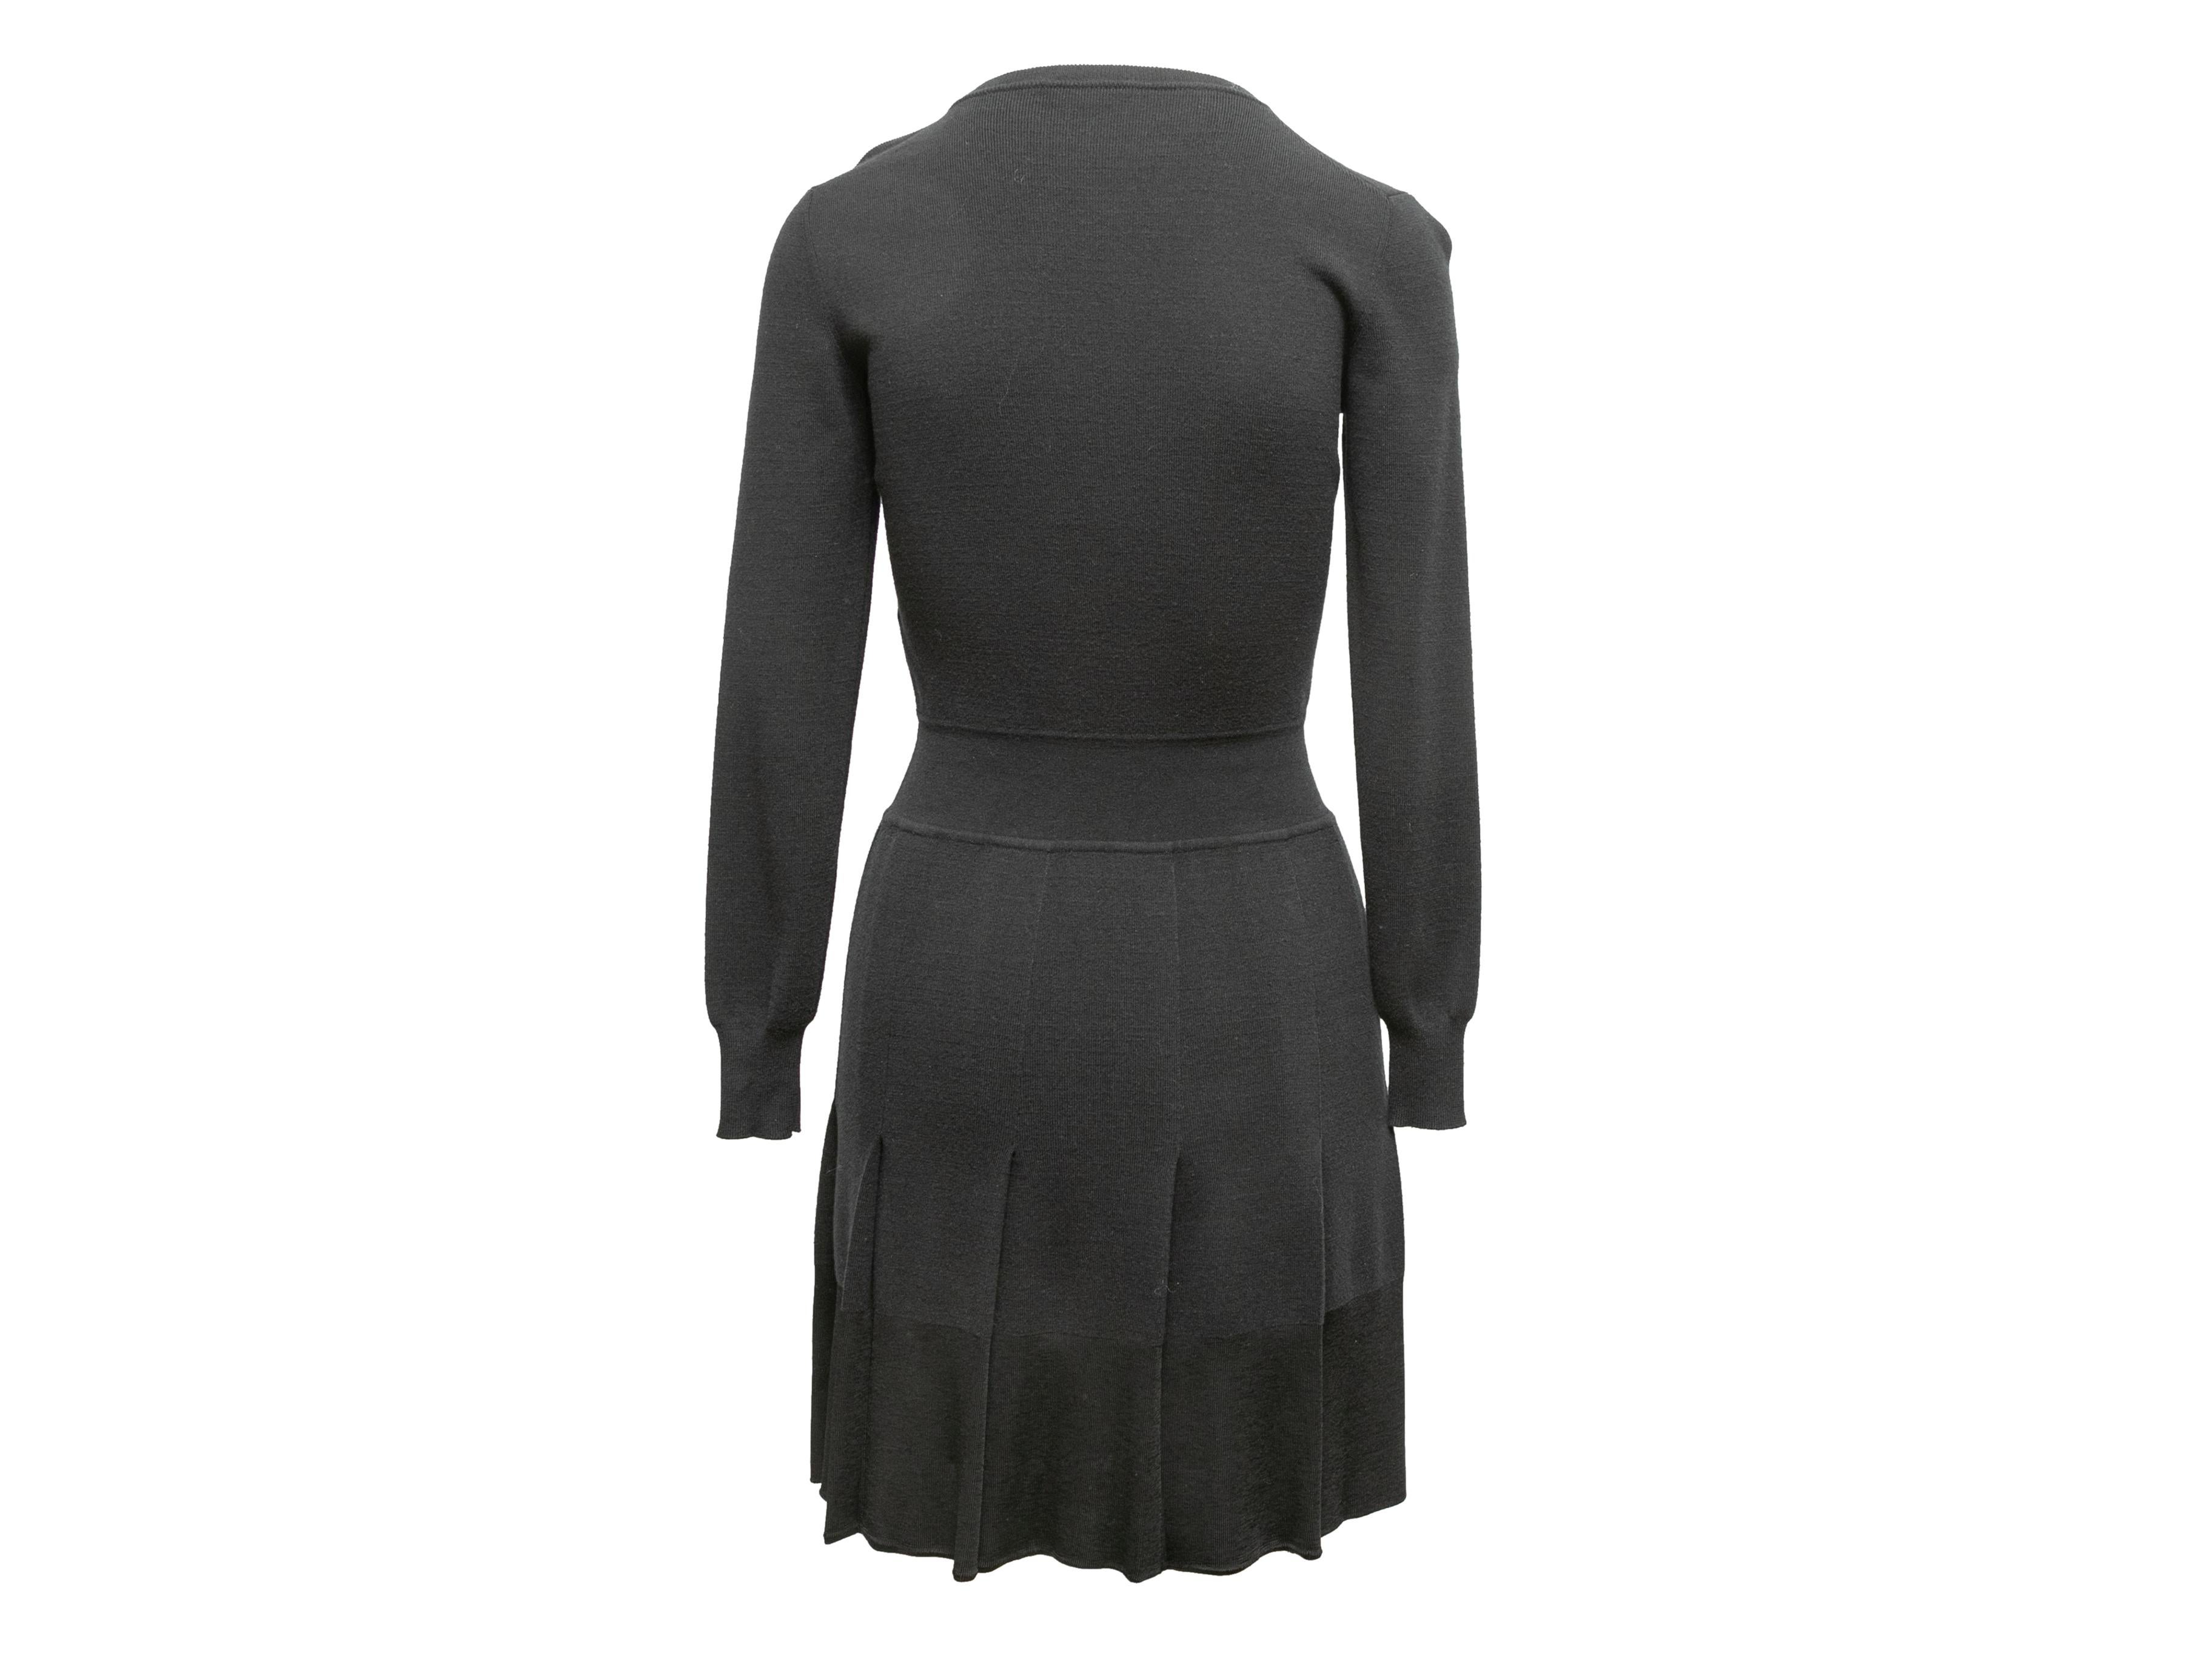 Black Chloe Pleated Knit Dress In Excellent Condition For Sale In New York, NY